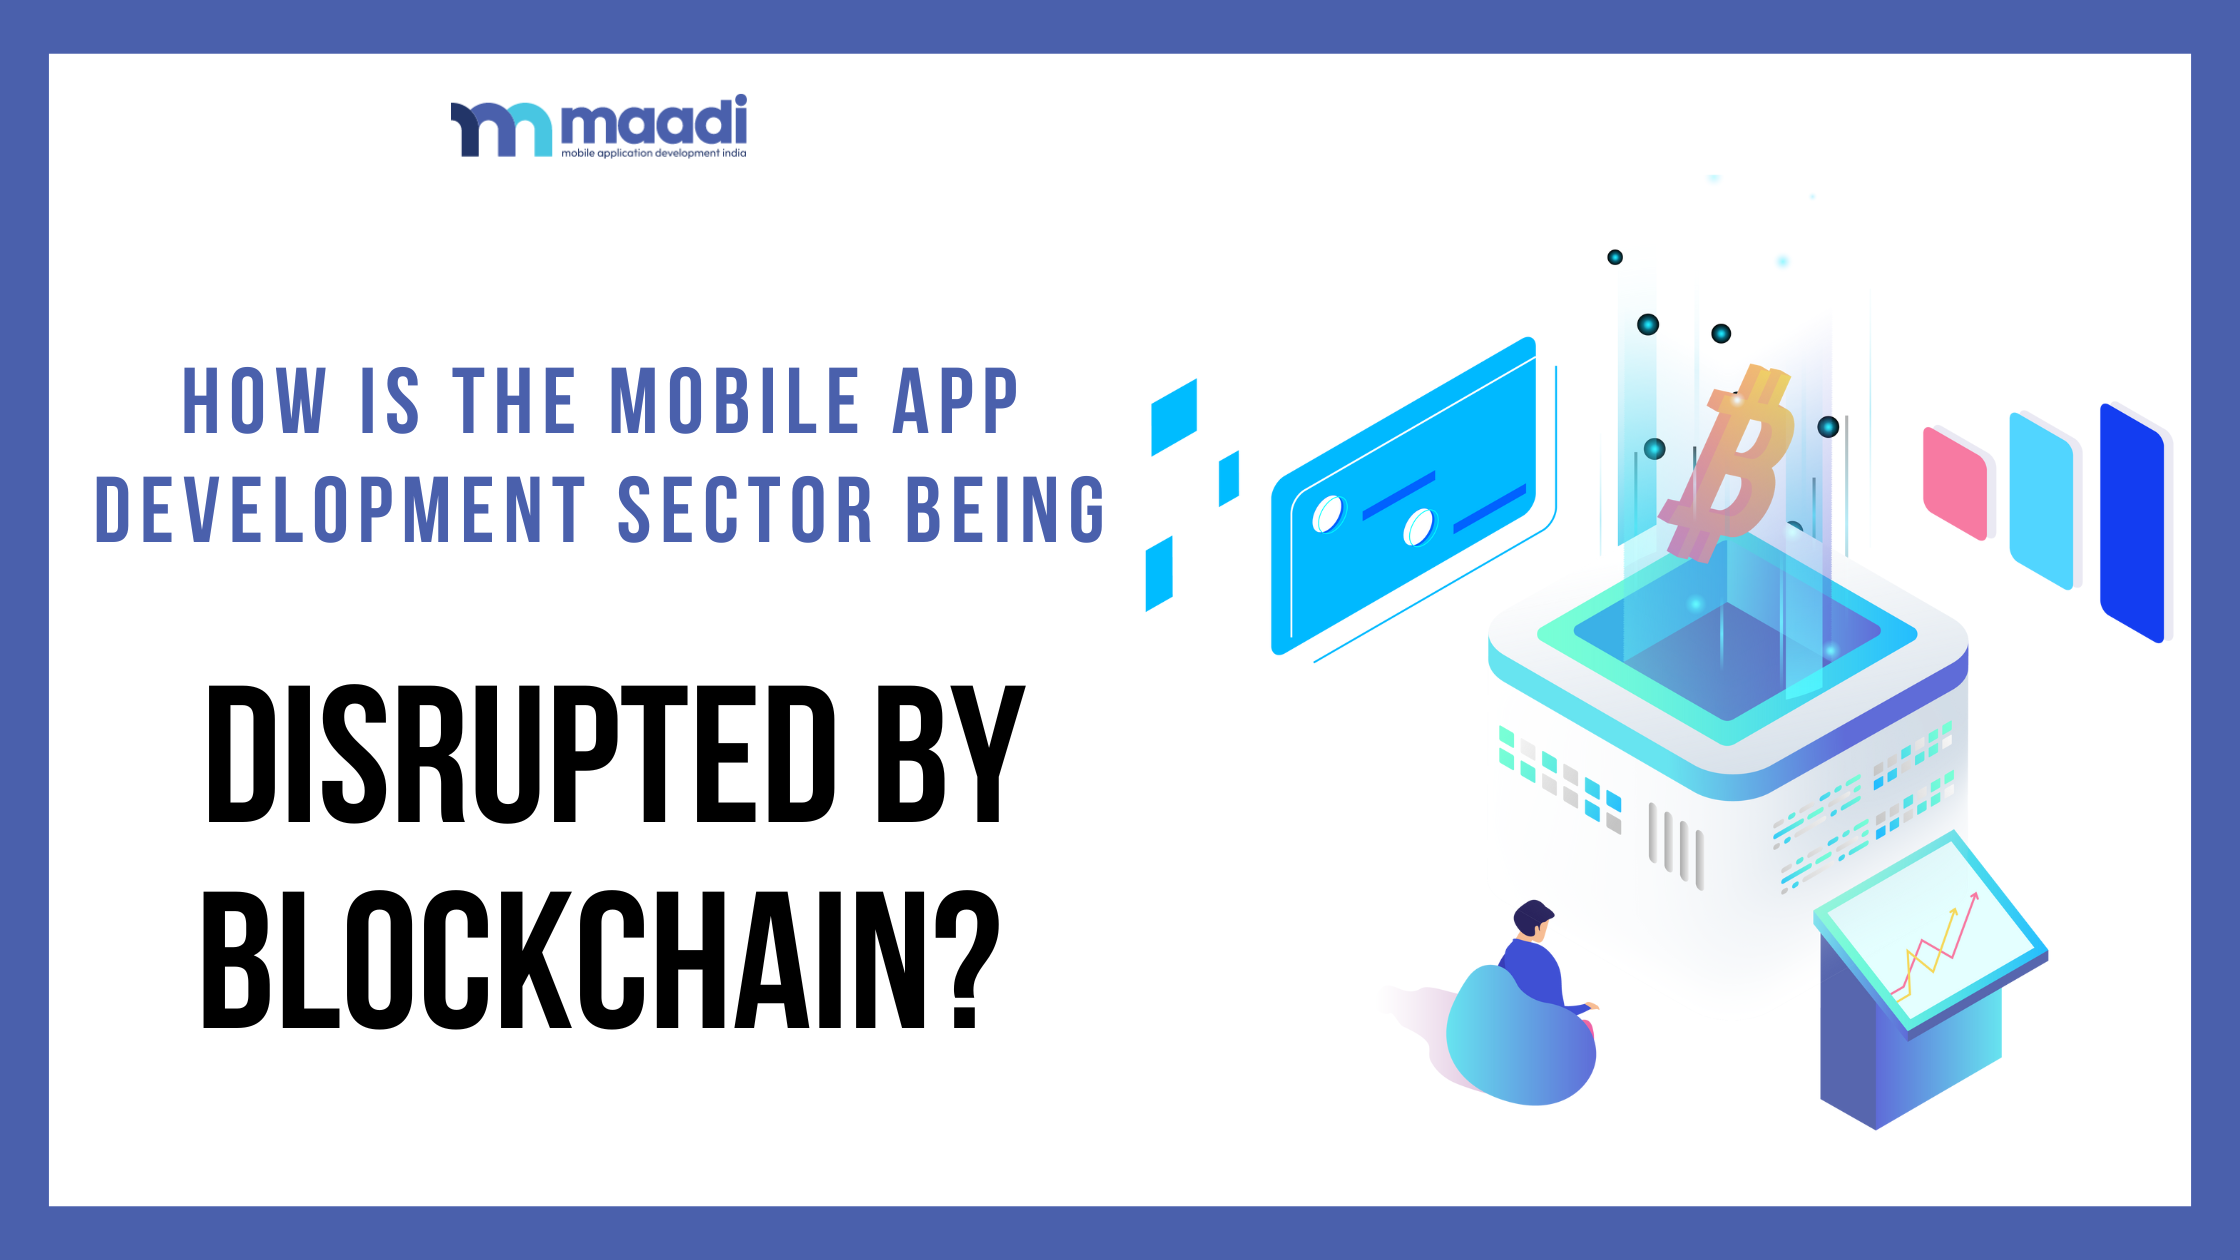 How is the Mobile App Development Sector Being Disrupted by Blockchain?